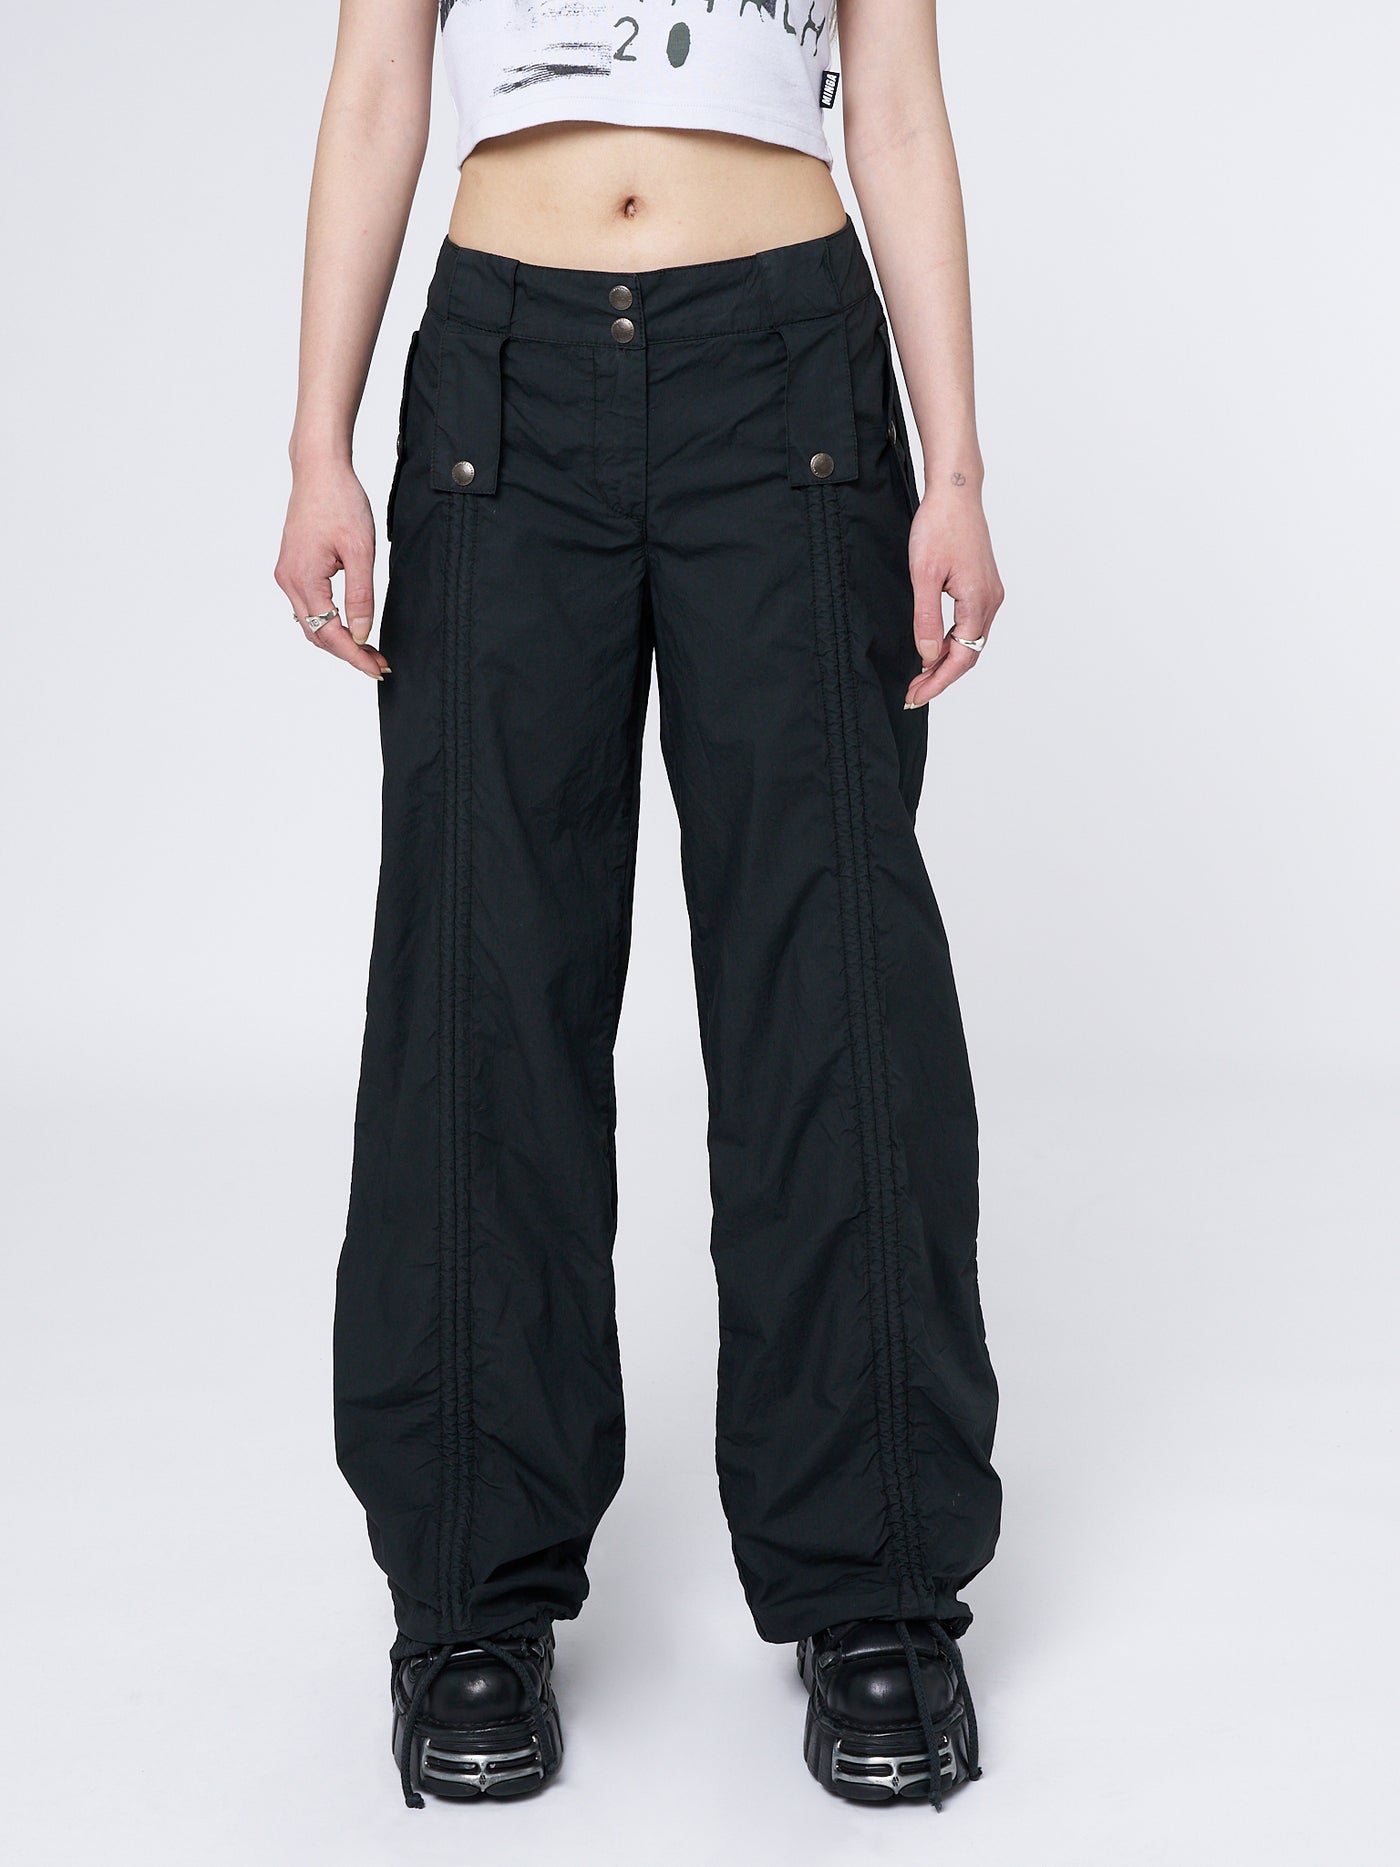 Black ruched front pants by Minga London - Bea. Chic and comfortable pants with a flattering ruched front detail. Versatile for various stylish ensembles.